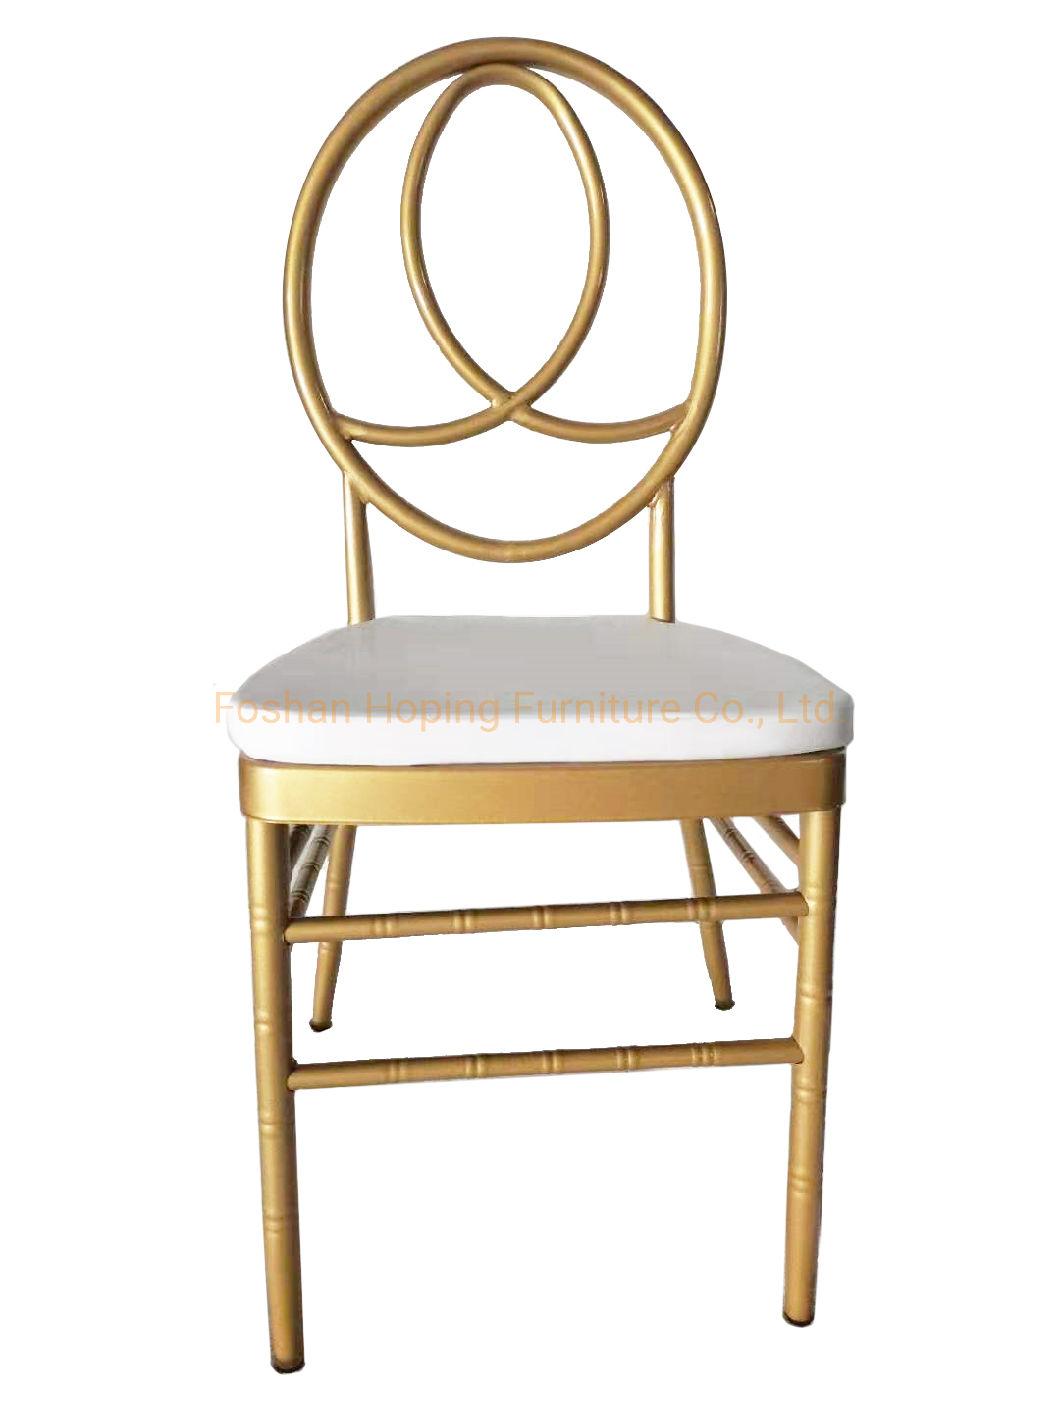 Hot Sale Antique Classic X Back Chair Crossback Wedding Chair Computer Stool China Foshan Gold Cheap Wedding Used Napoleon Chrome Gold Dining Chairs